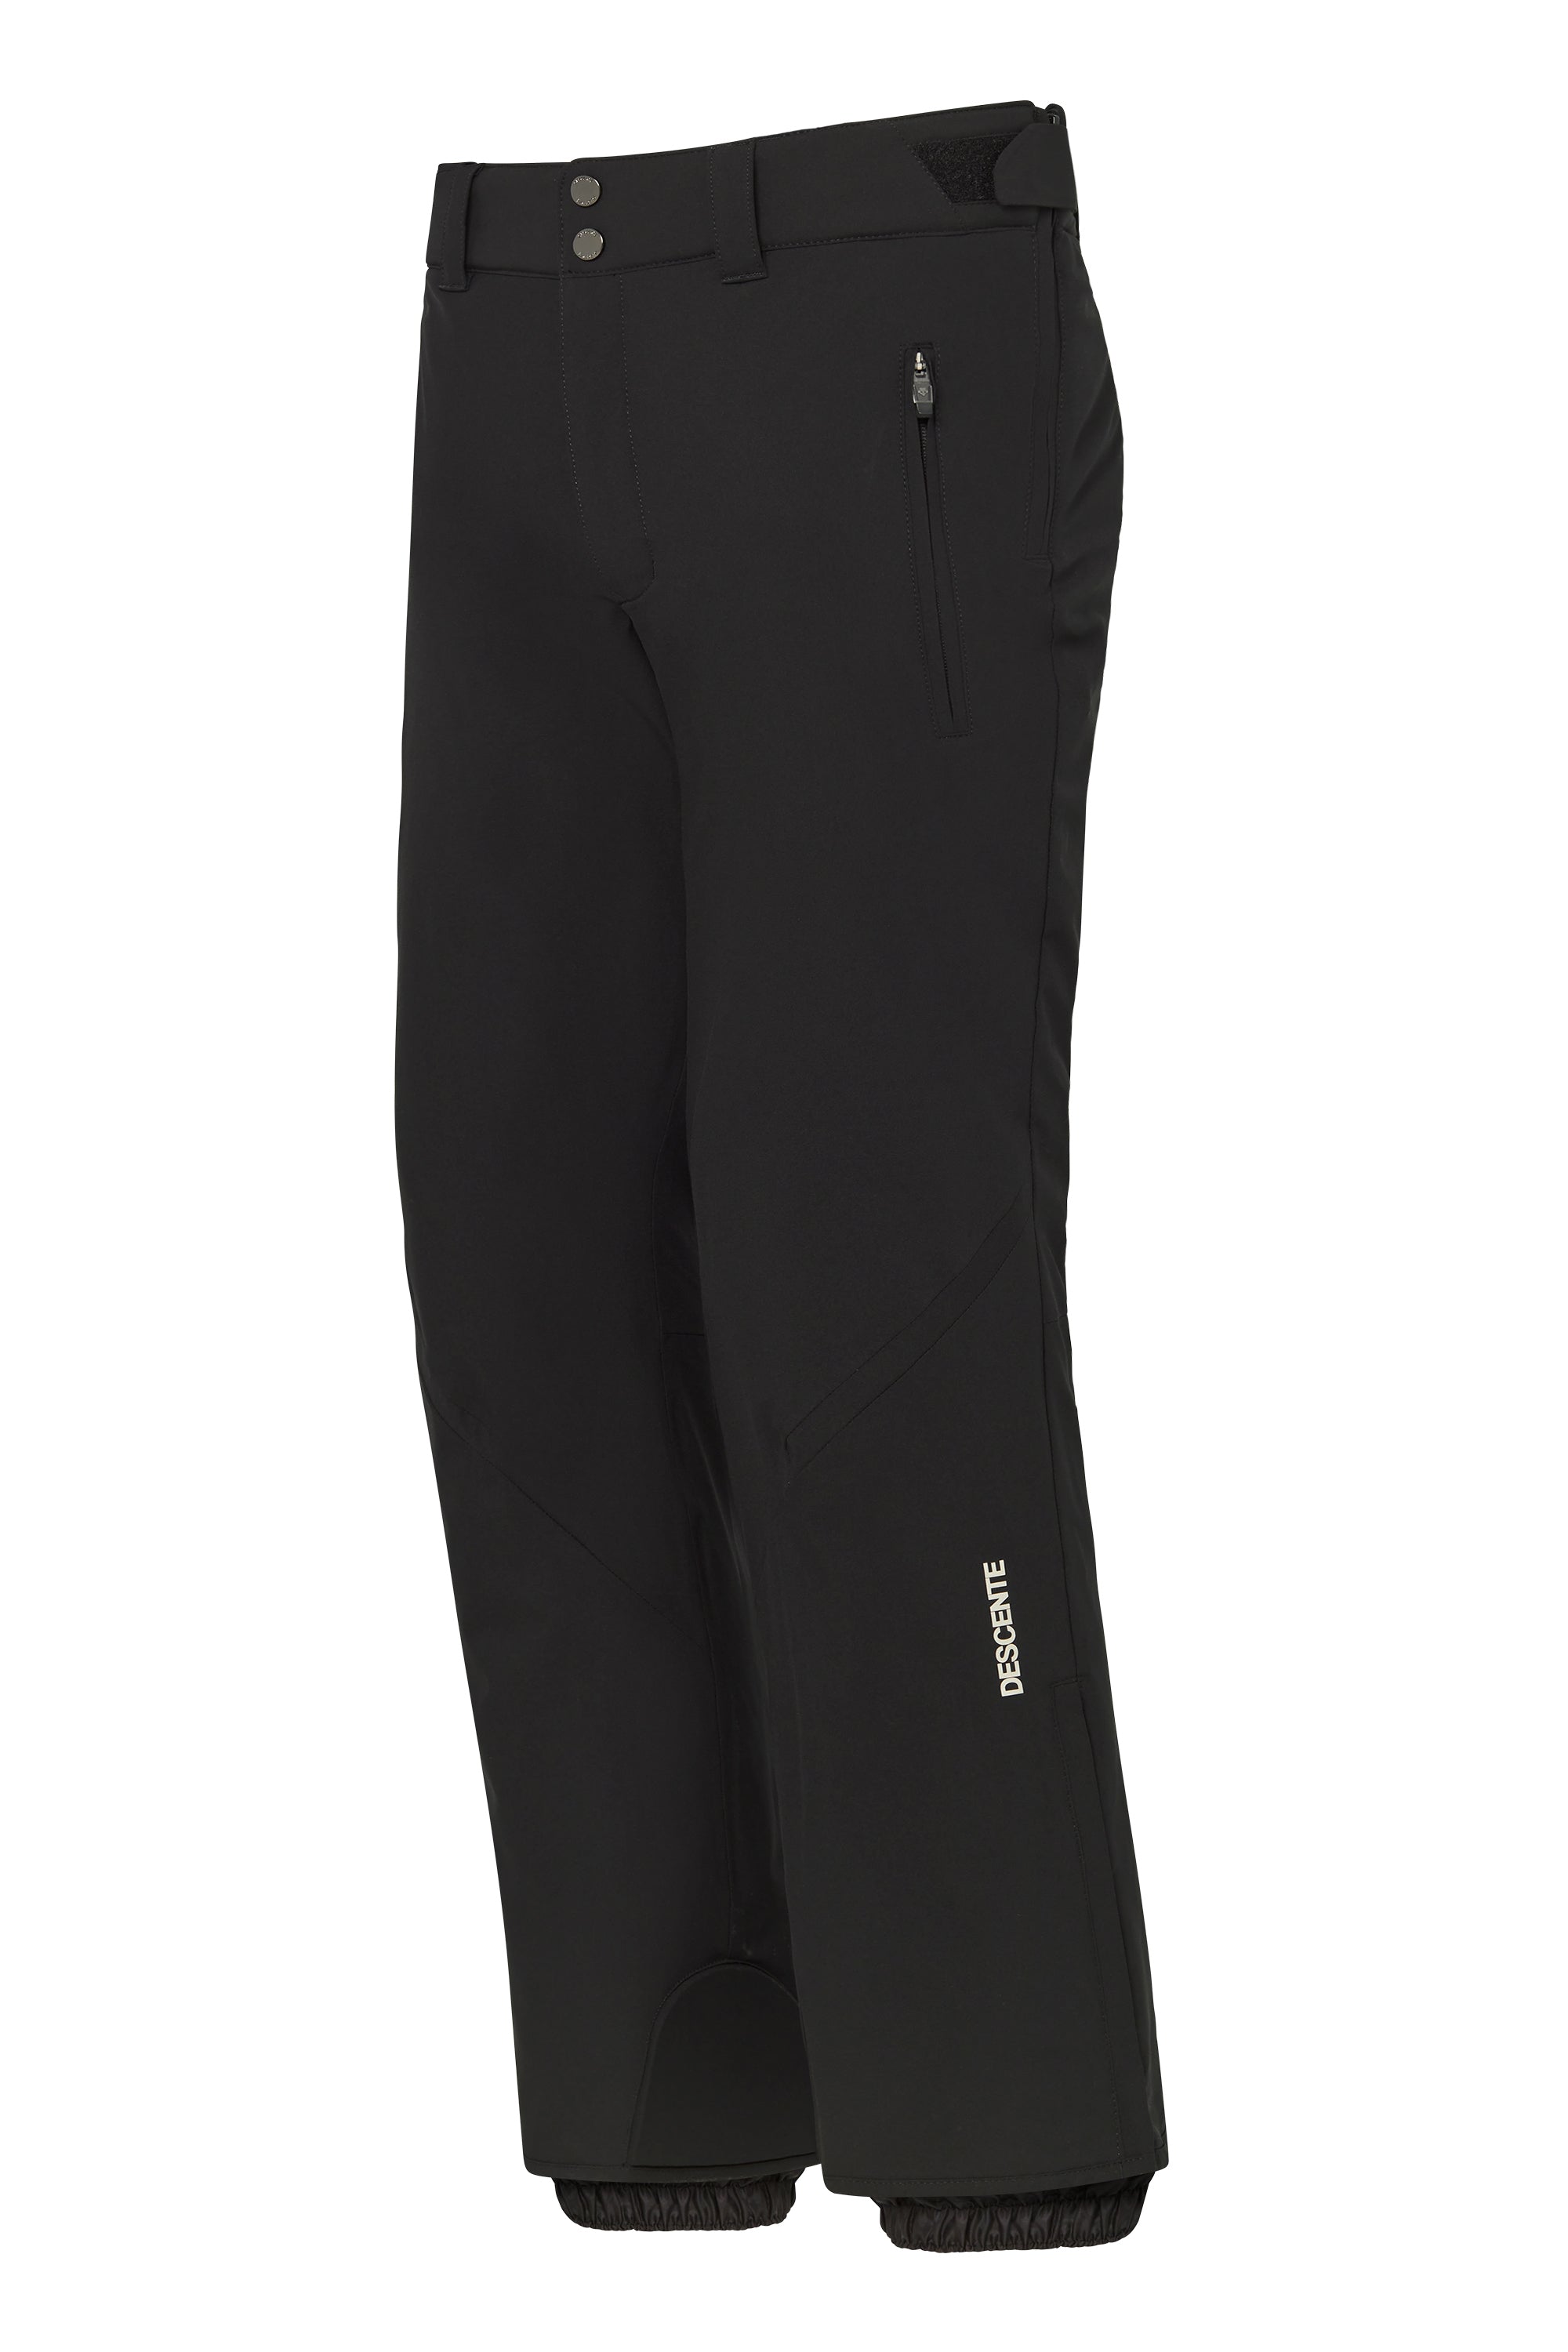 Roscoe Insulated Pant M